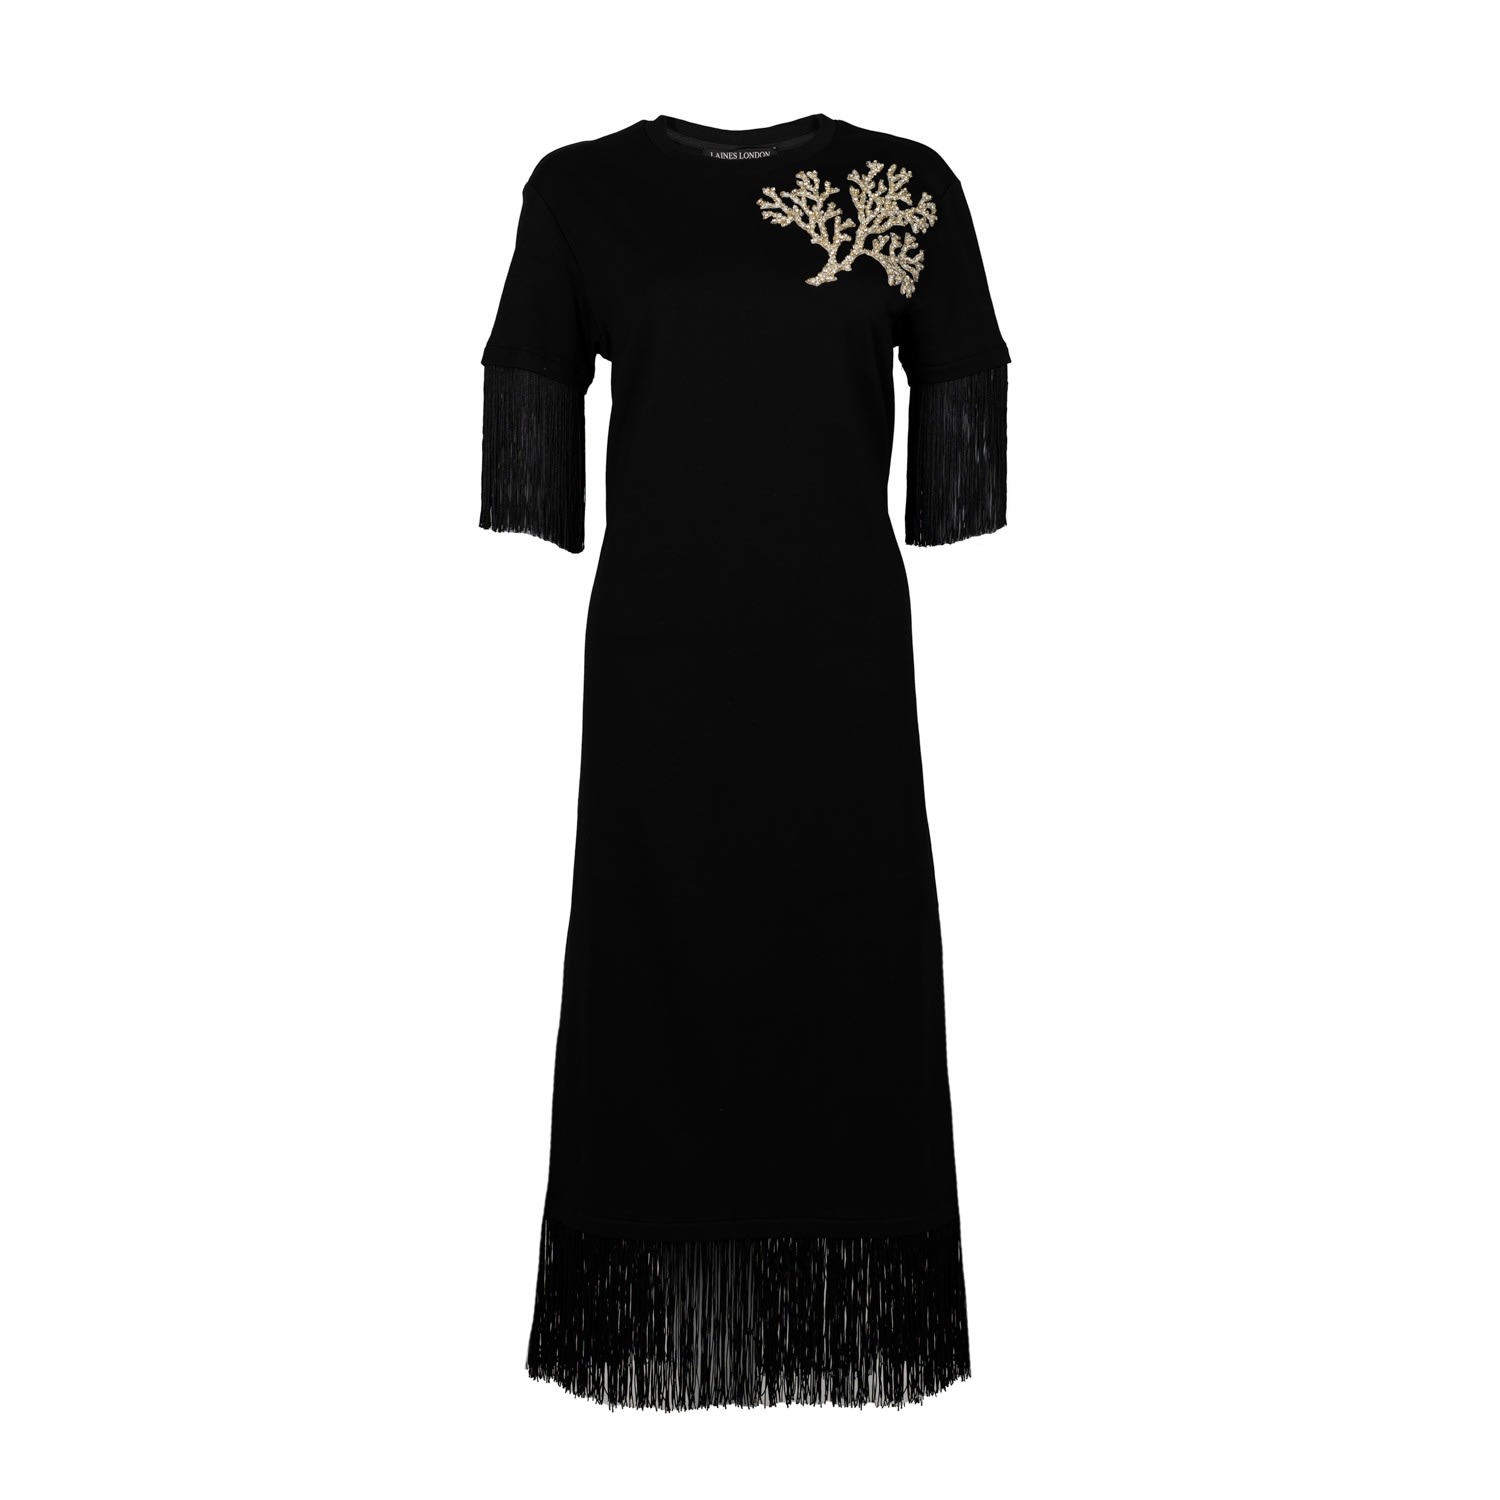 Women’s Laines Couture Fringed Tassel Dress With Embellished Coral - Black L/Xl Laines London